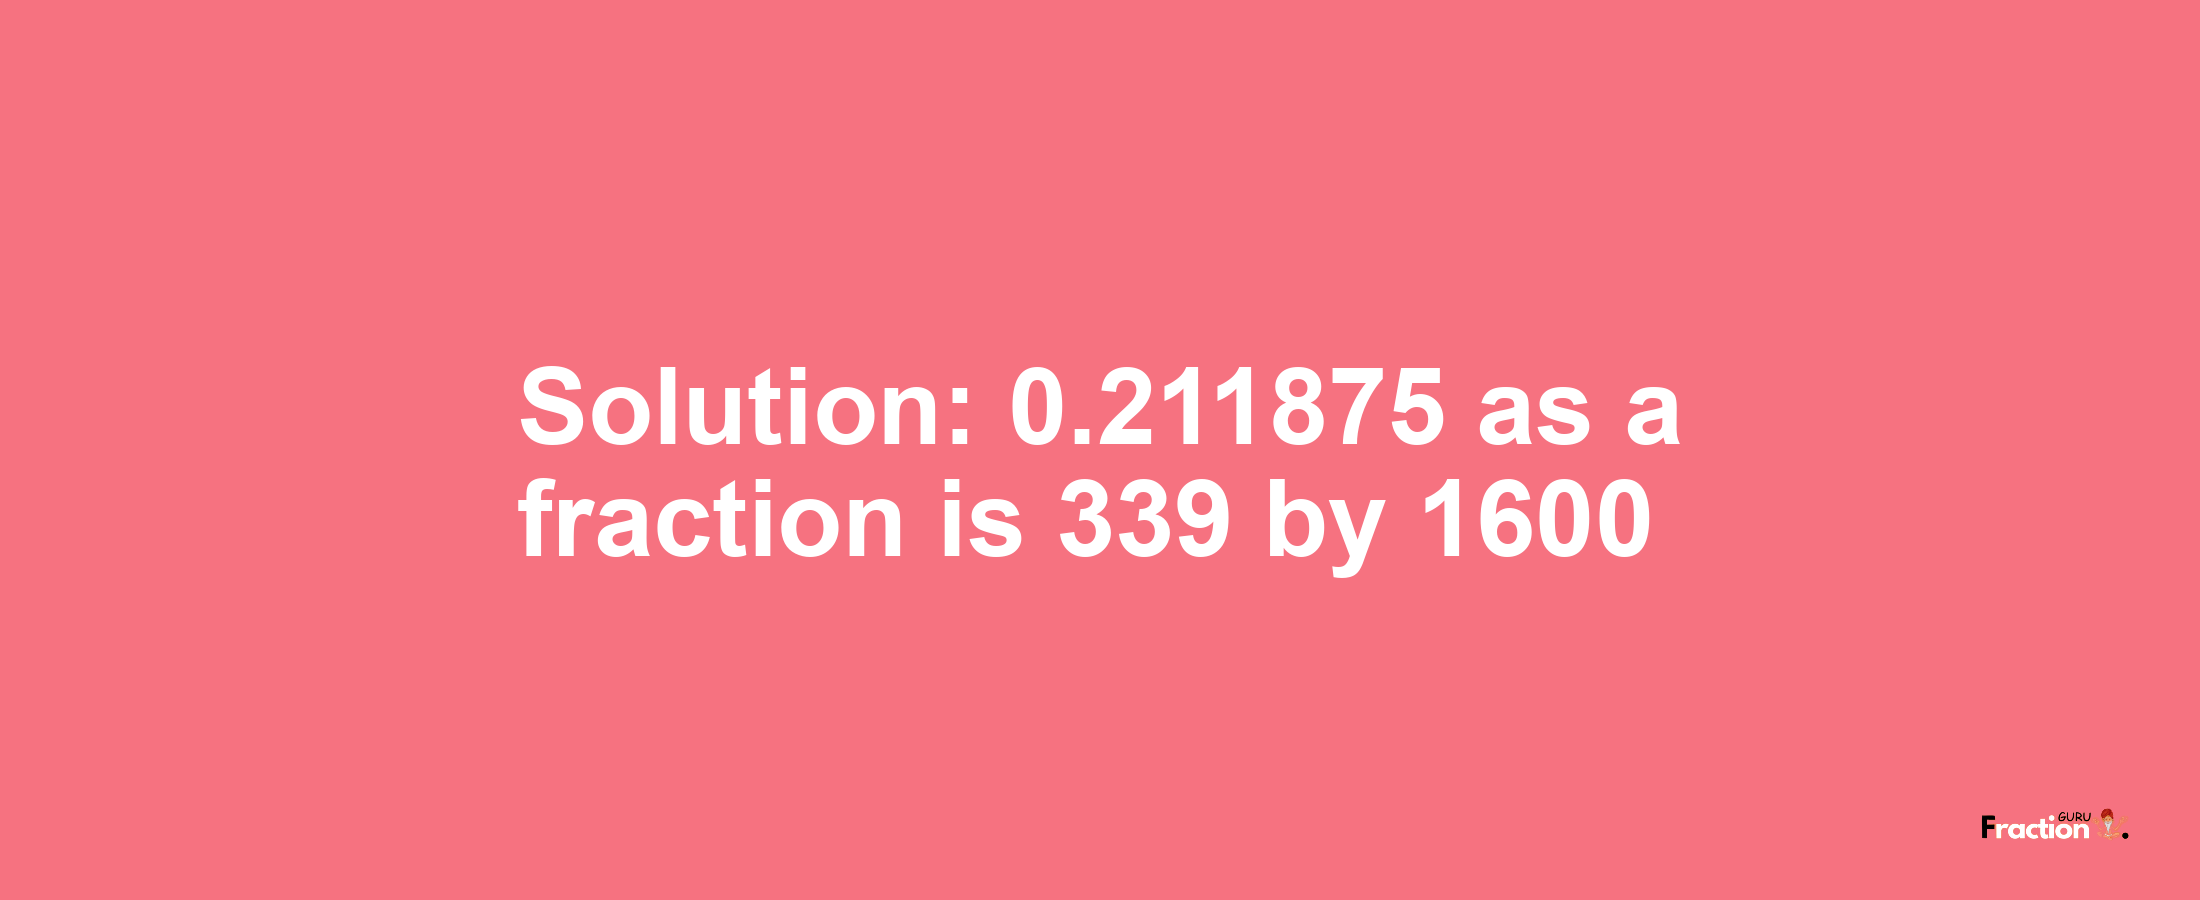 Solution:0.211875 as a fraction is 339/1600